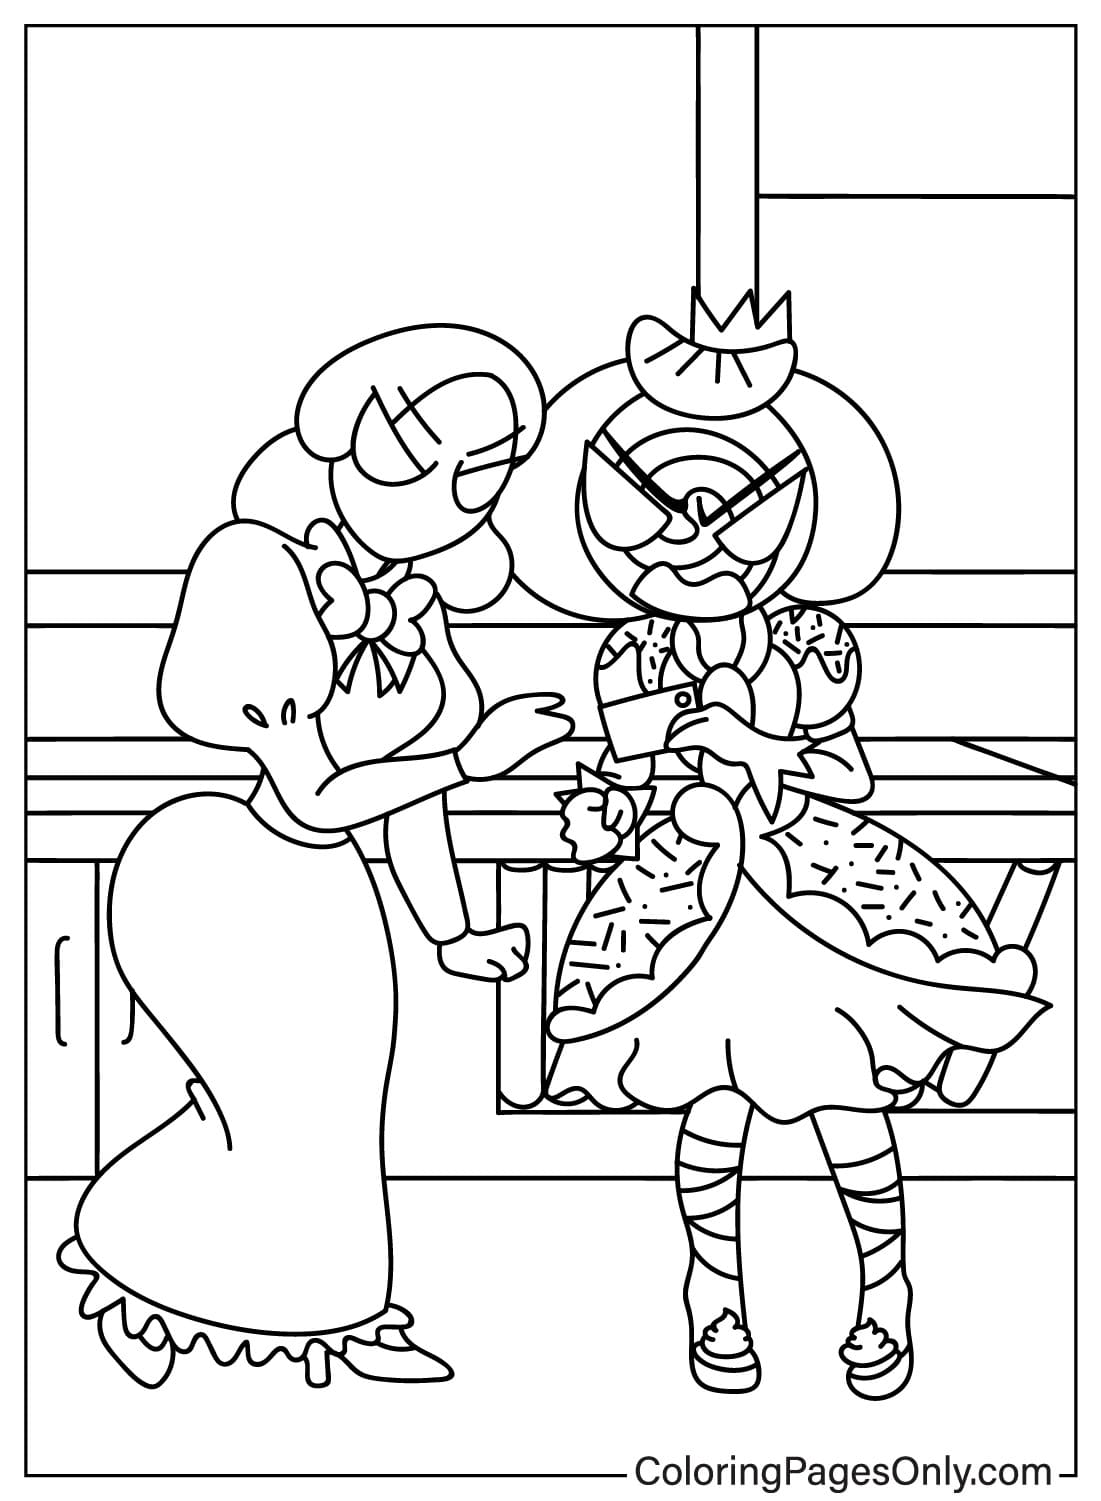 Candy Princess and Martha Found are Angry Coloring Page from Princess Loolilalu